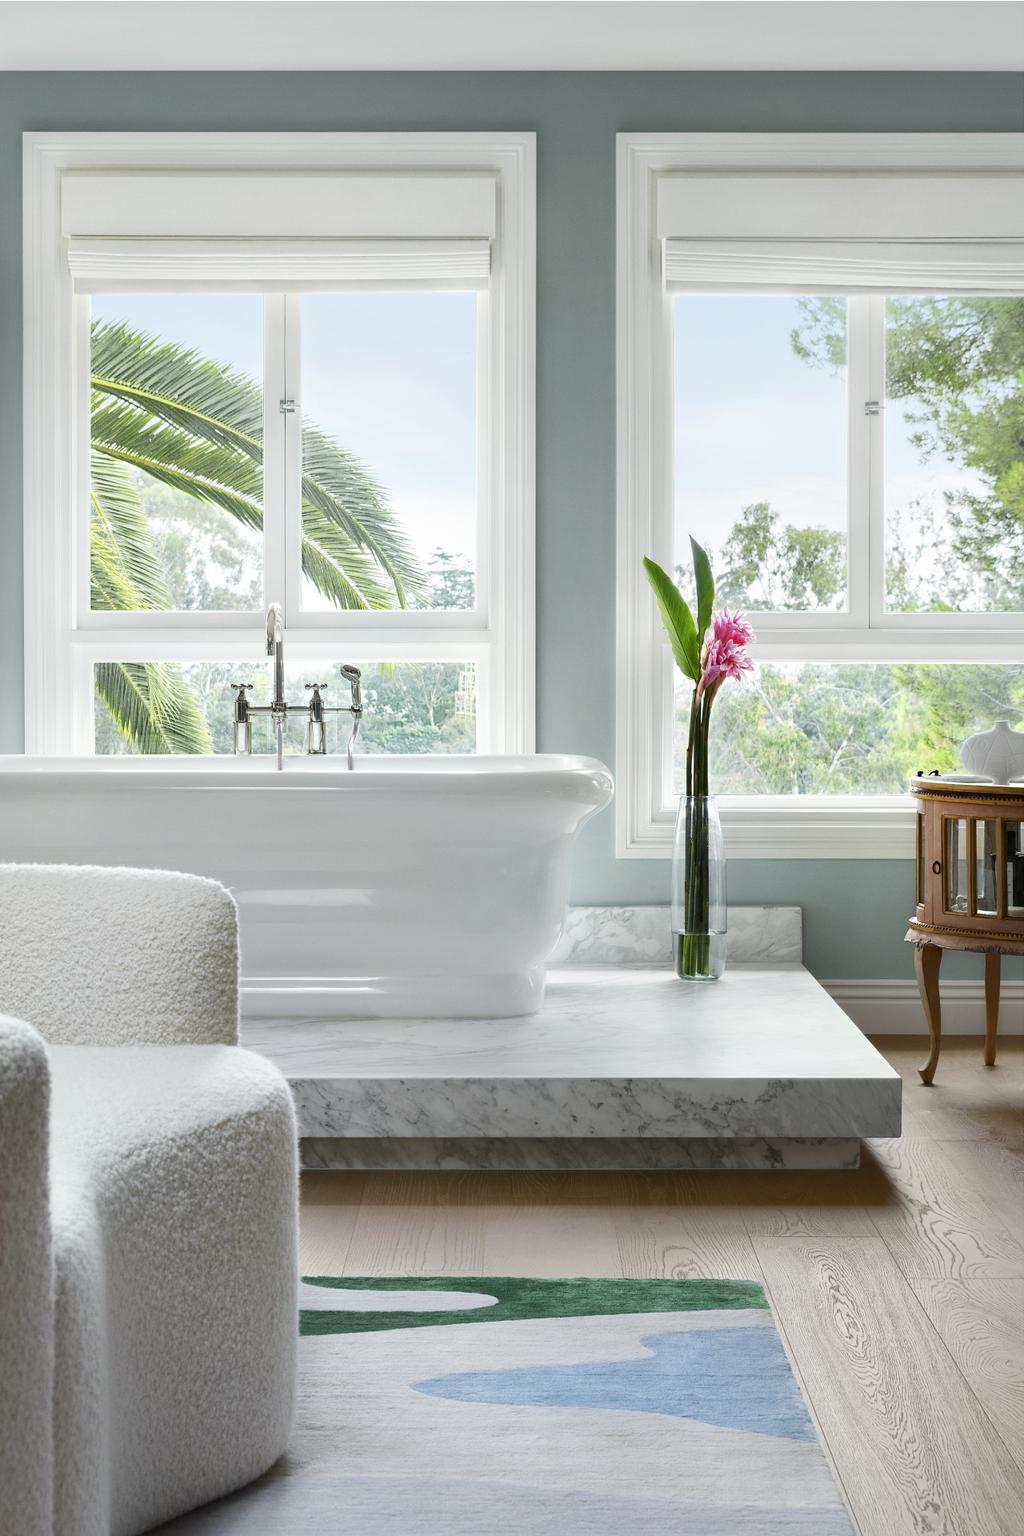 main bathroom featuring a curved sofa at its center